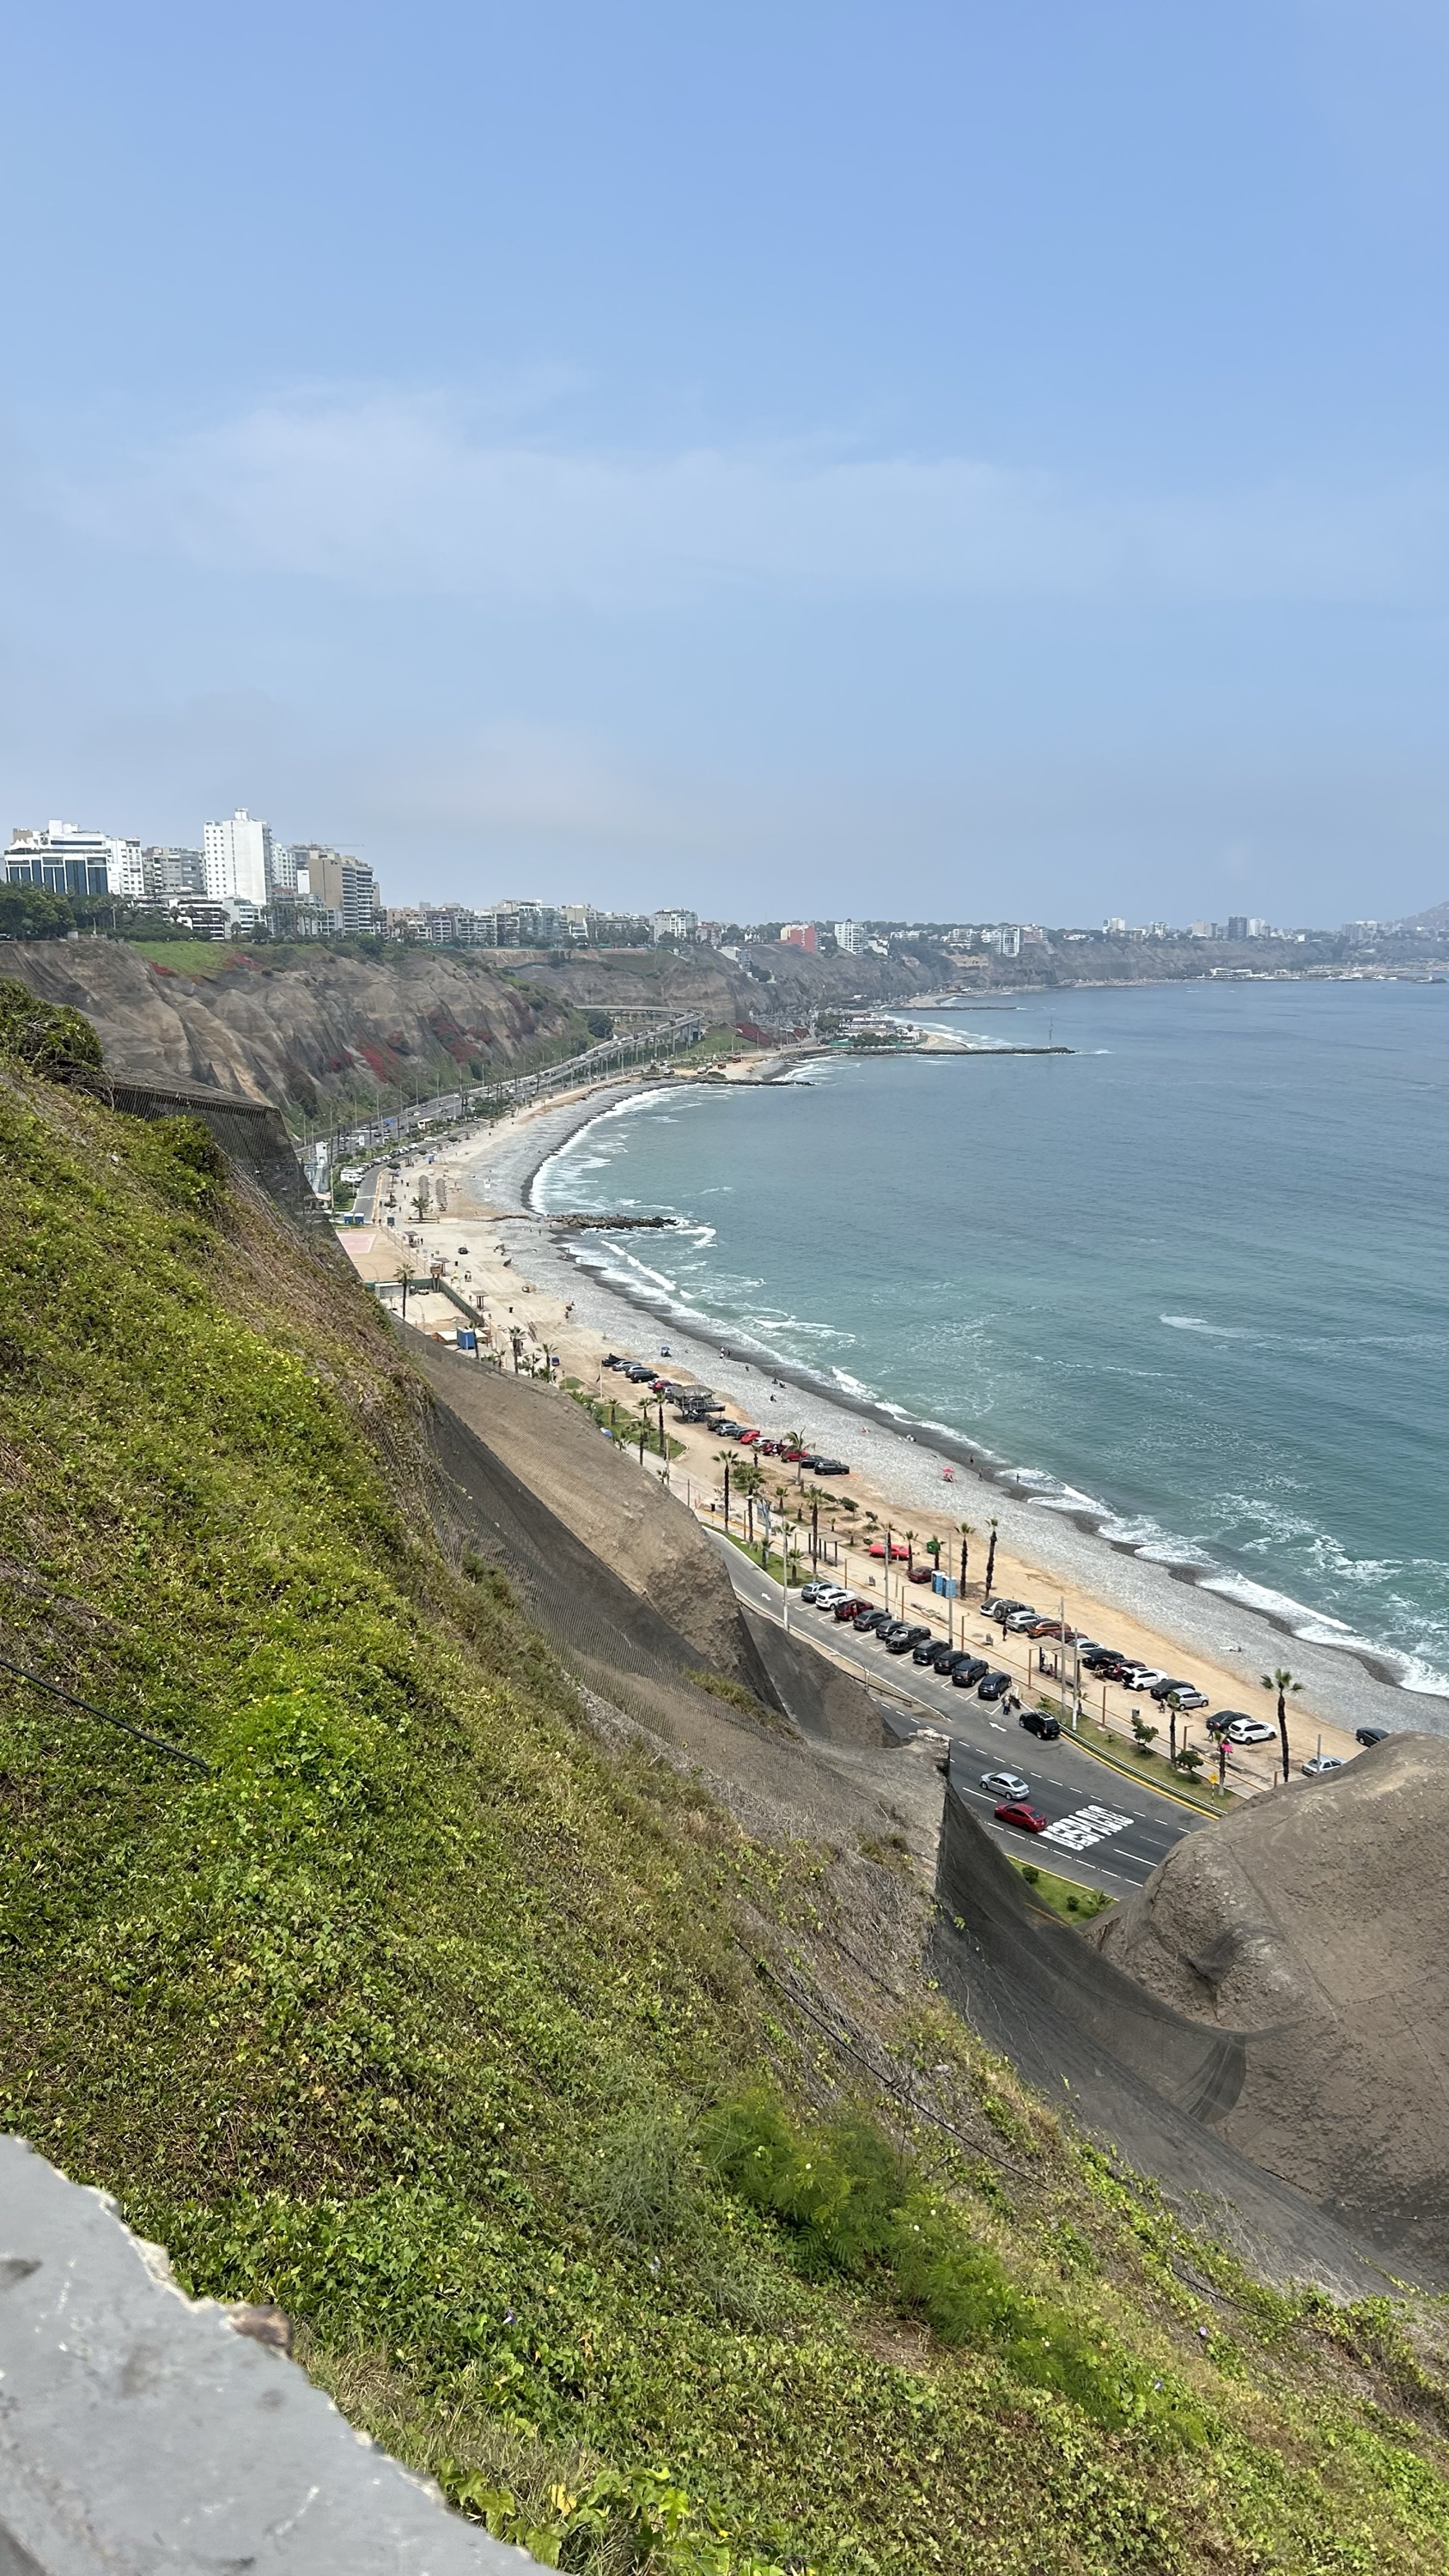 Picture from Area related to San Borja, Barranco, Chorrillos shoot by Rafael Marmugi